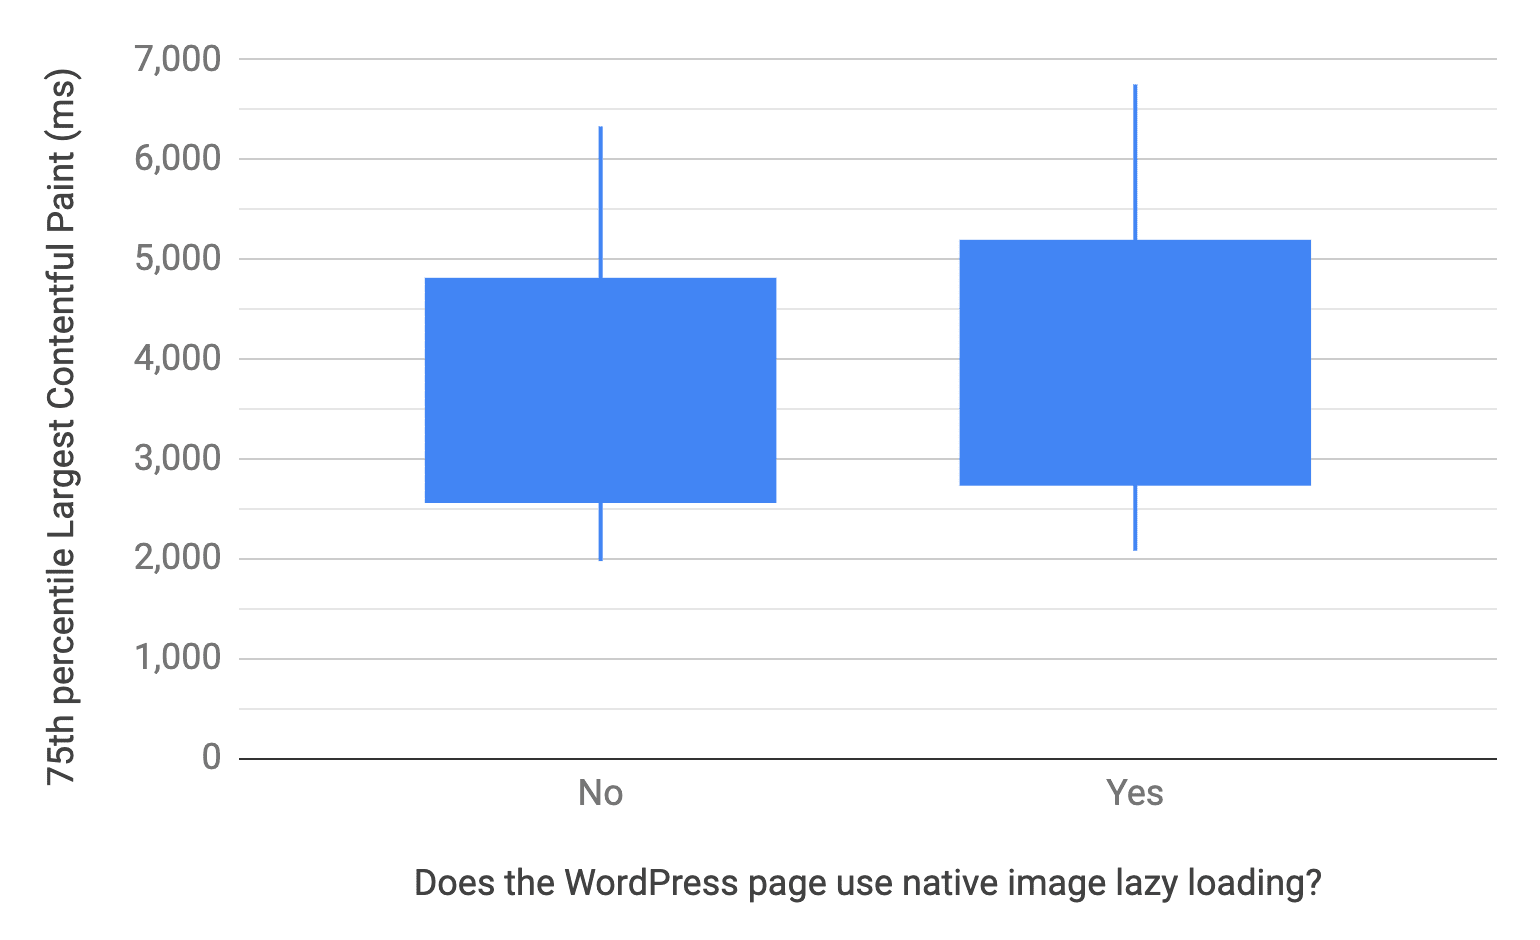 Box and whisker chart showing the 10, 25, 75, and 90th percentiles for WordPress pages that do and do not use browser-level image lazy loading. Comparatively, the LCP distribution of pages that do not use it is faster than those that do, similar to the previous chart.